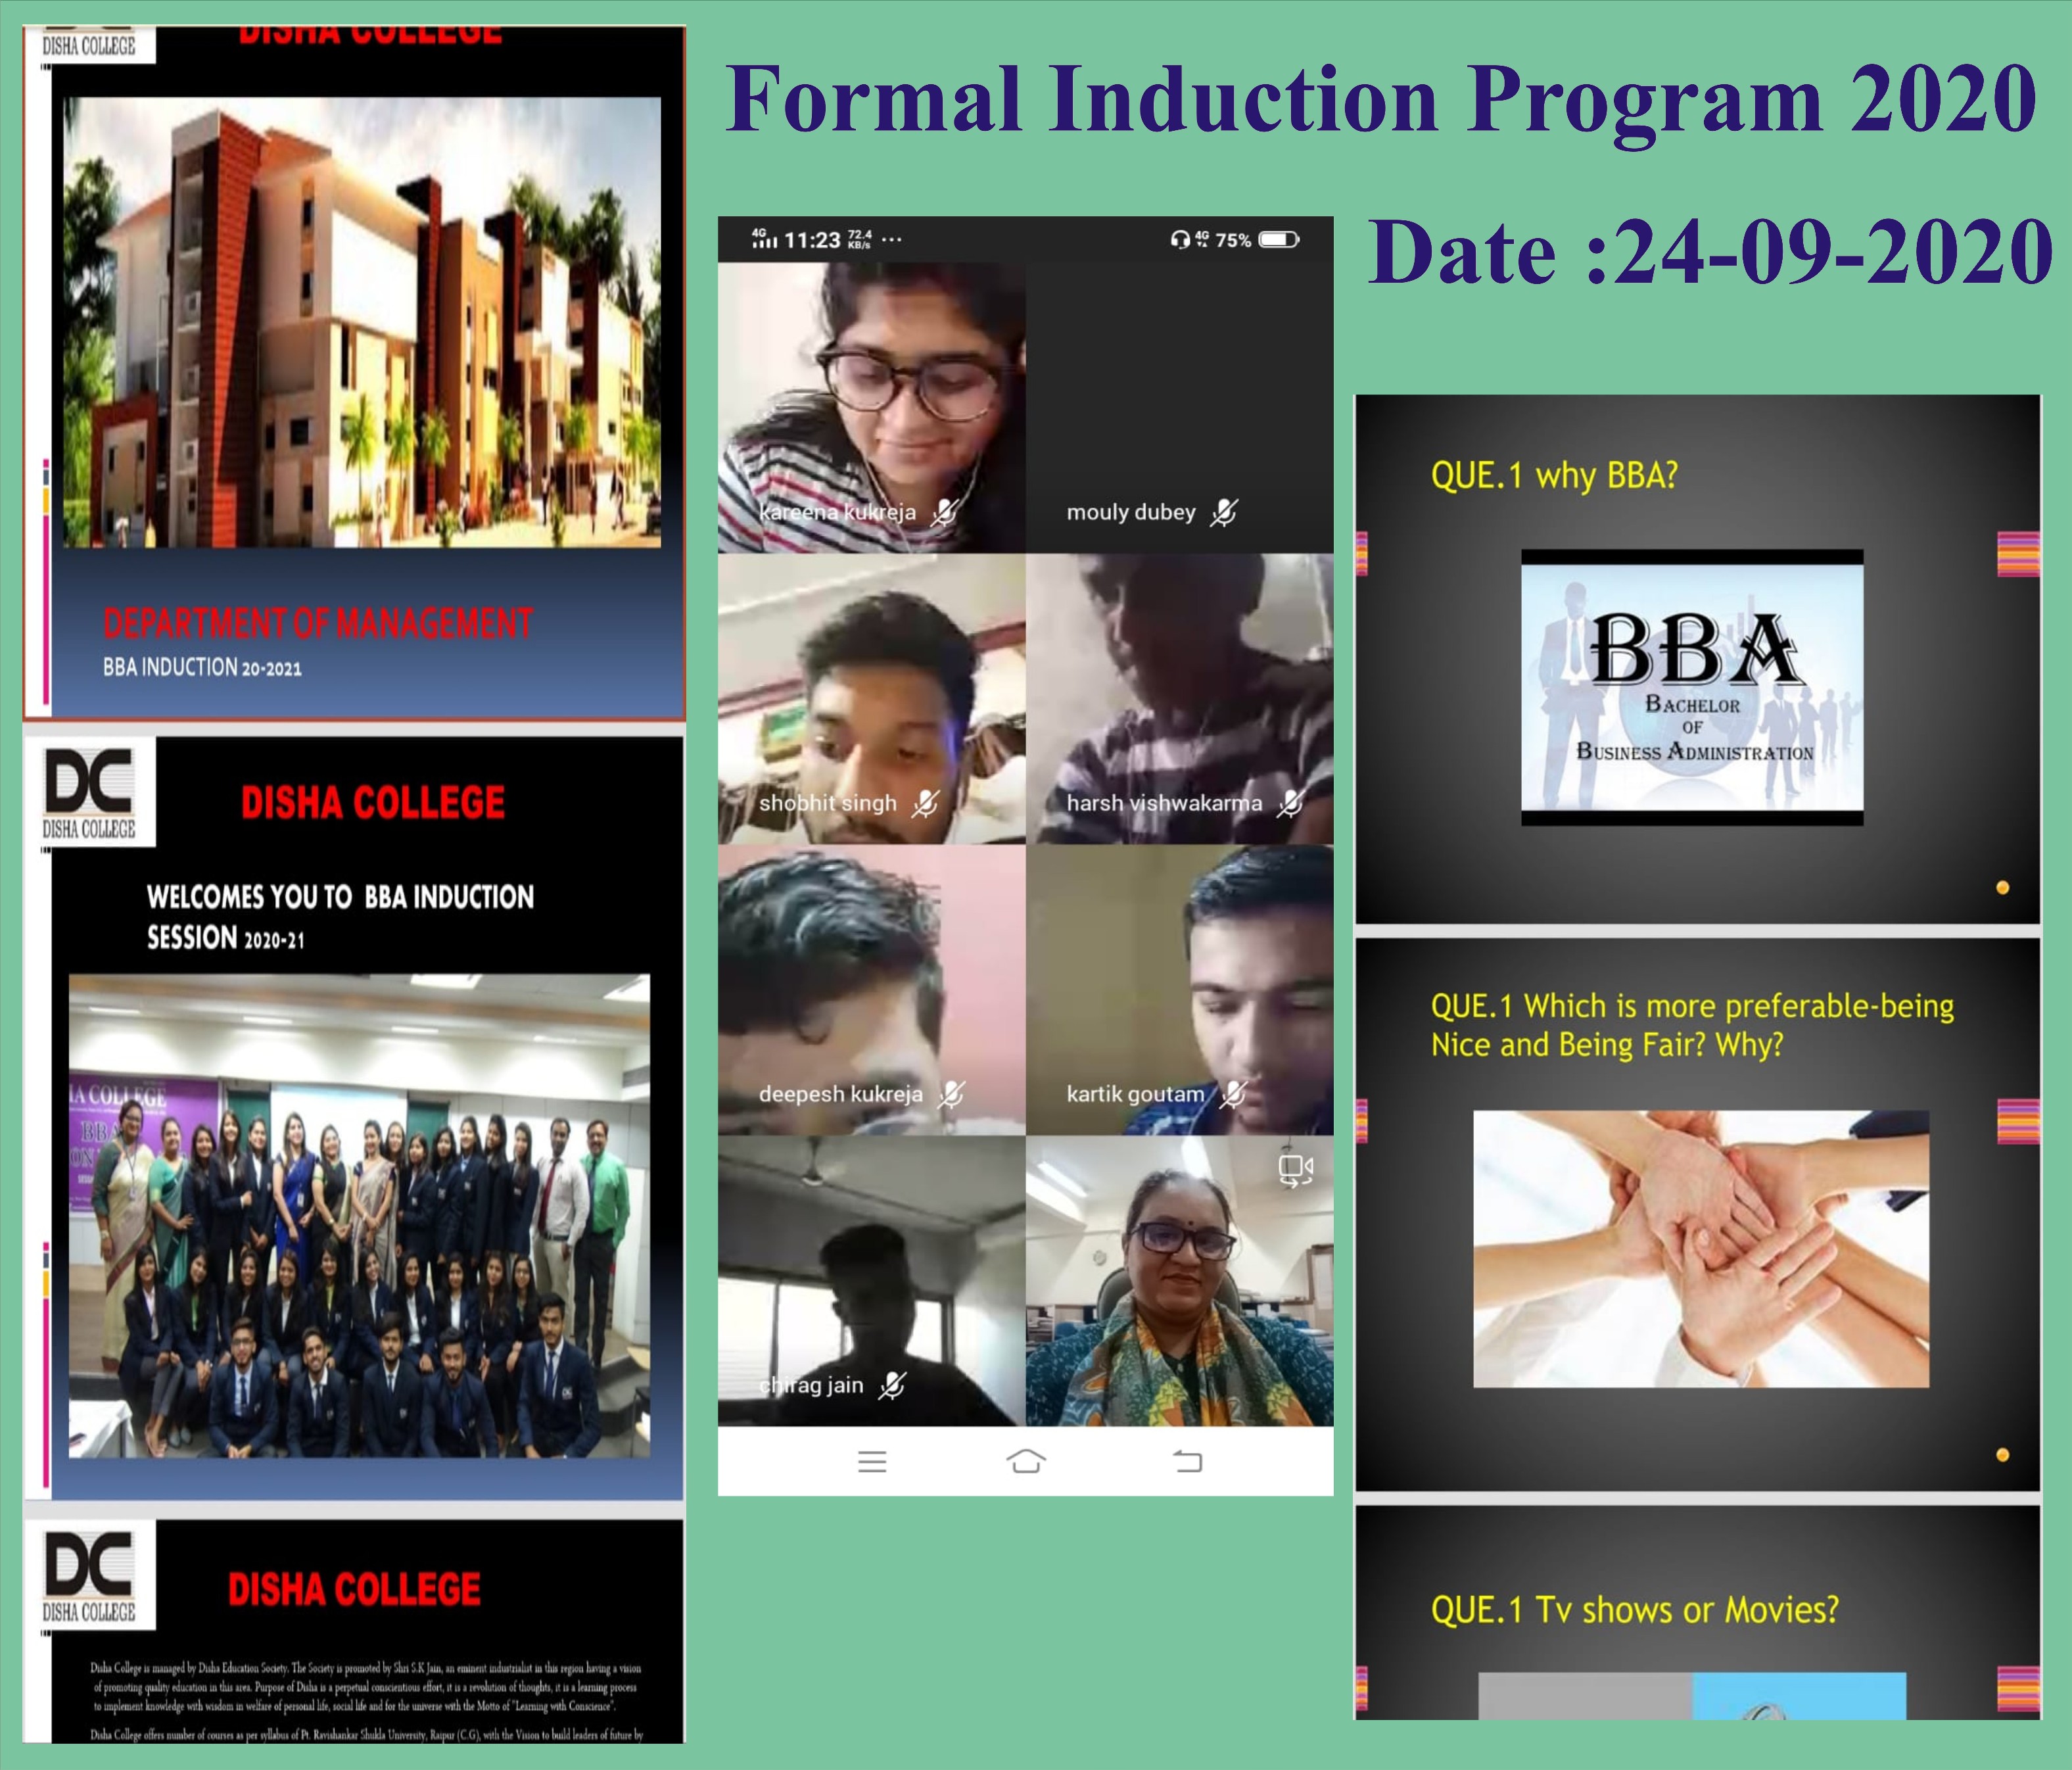 Formal Introduction Program for BBA 